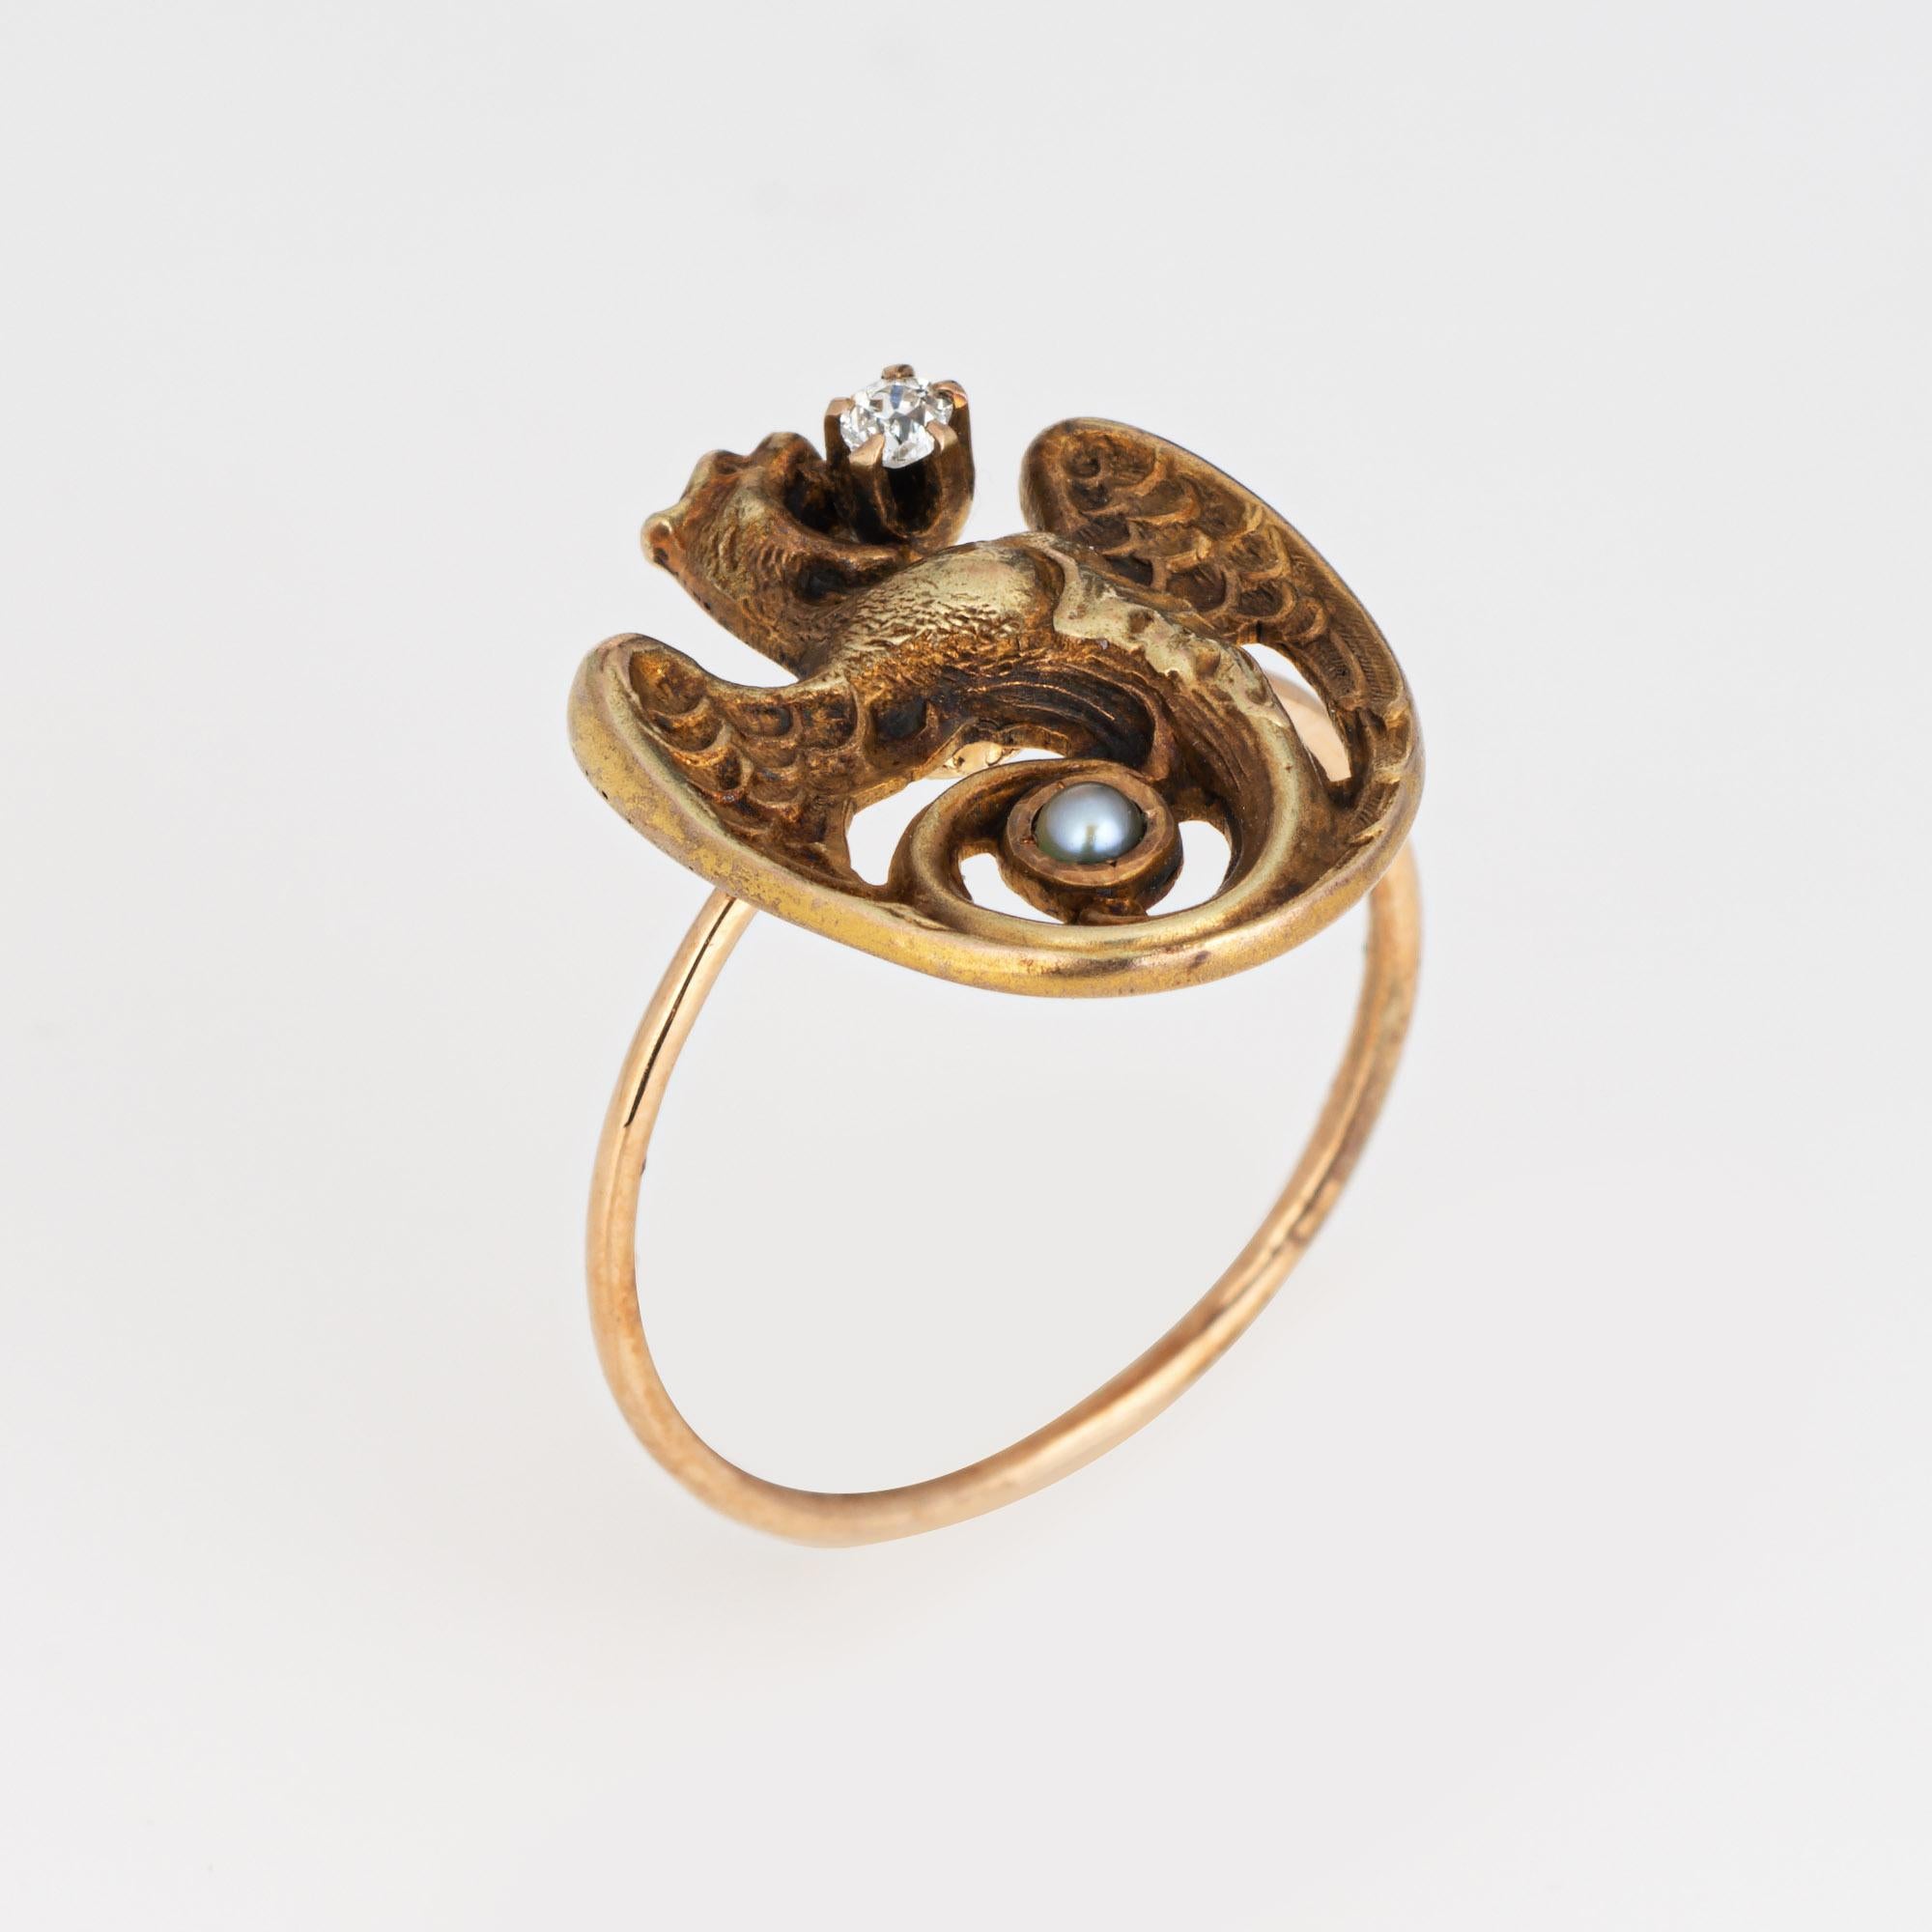 Originally an antique Victorian era stick pin (circa 1880s to 1900s), the Dragon ring is crafted in 14 karat yellow gold.

The ring is mounted with the original stick pin. Our jeweler rounded the stick pin into a slim band for the finger. The